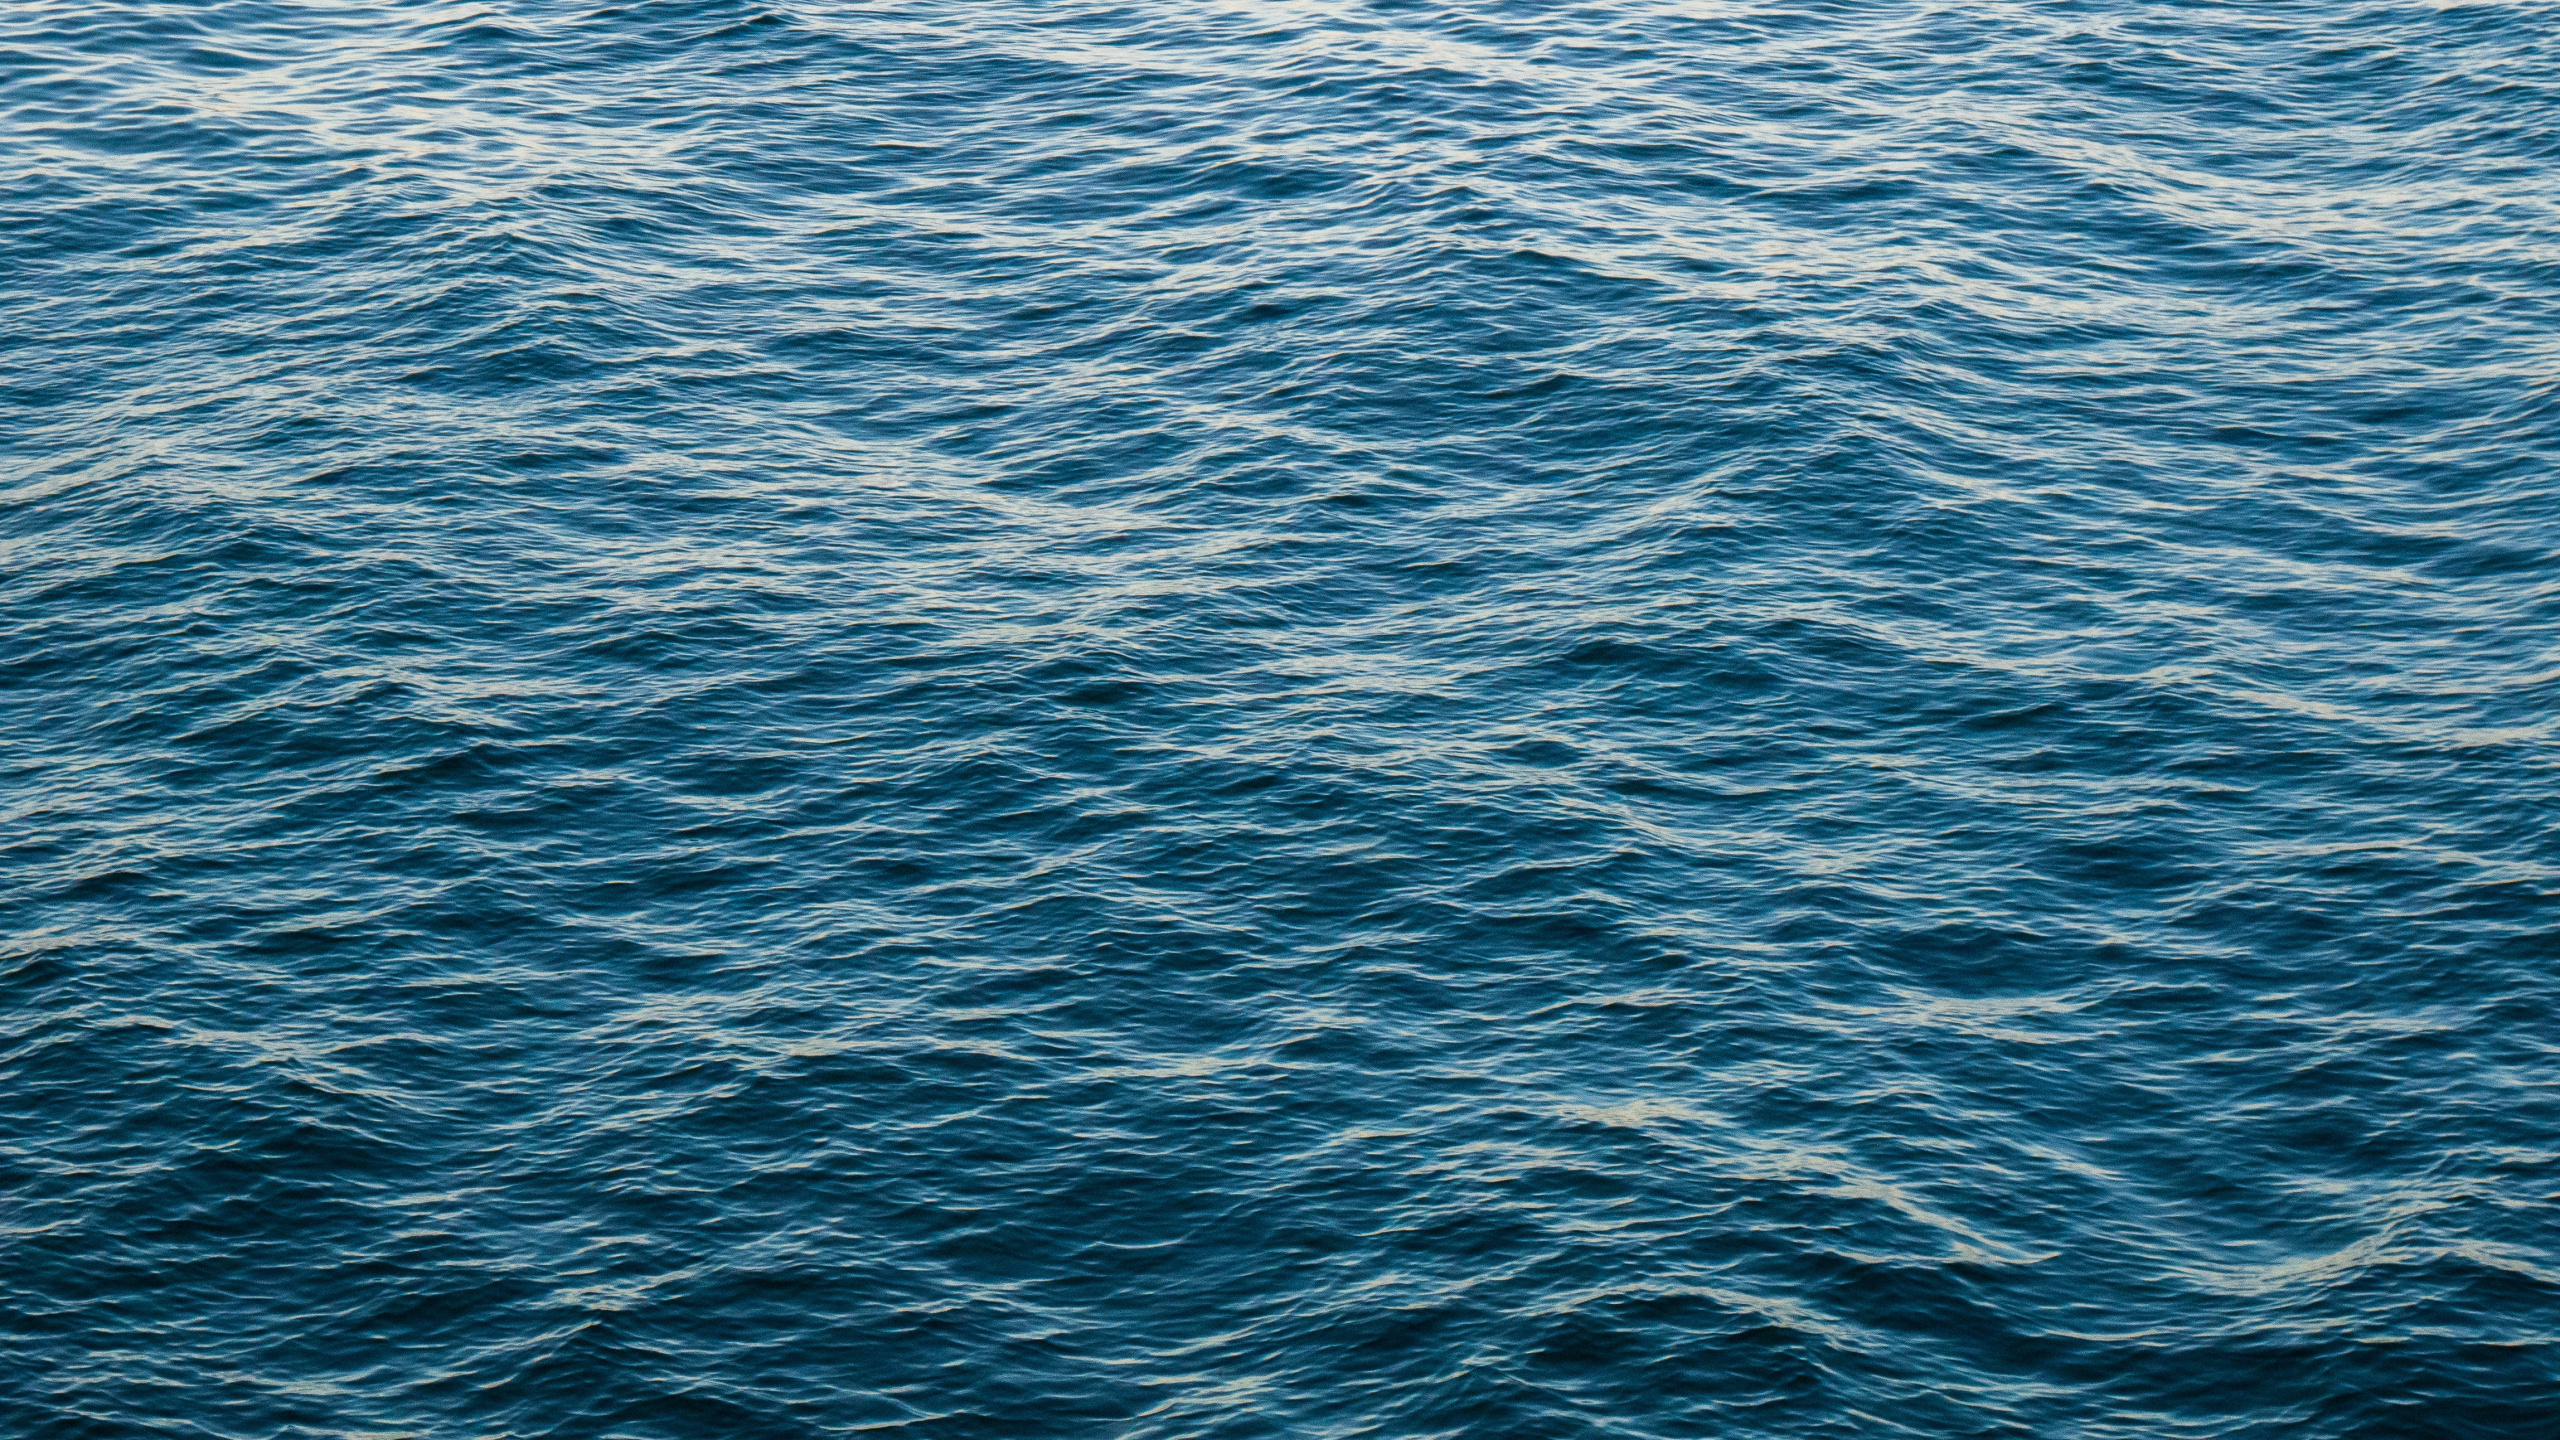 Blue Body of Water During Daytime. Wallpaper in 2560x1440 Resolution